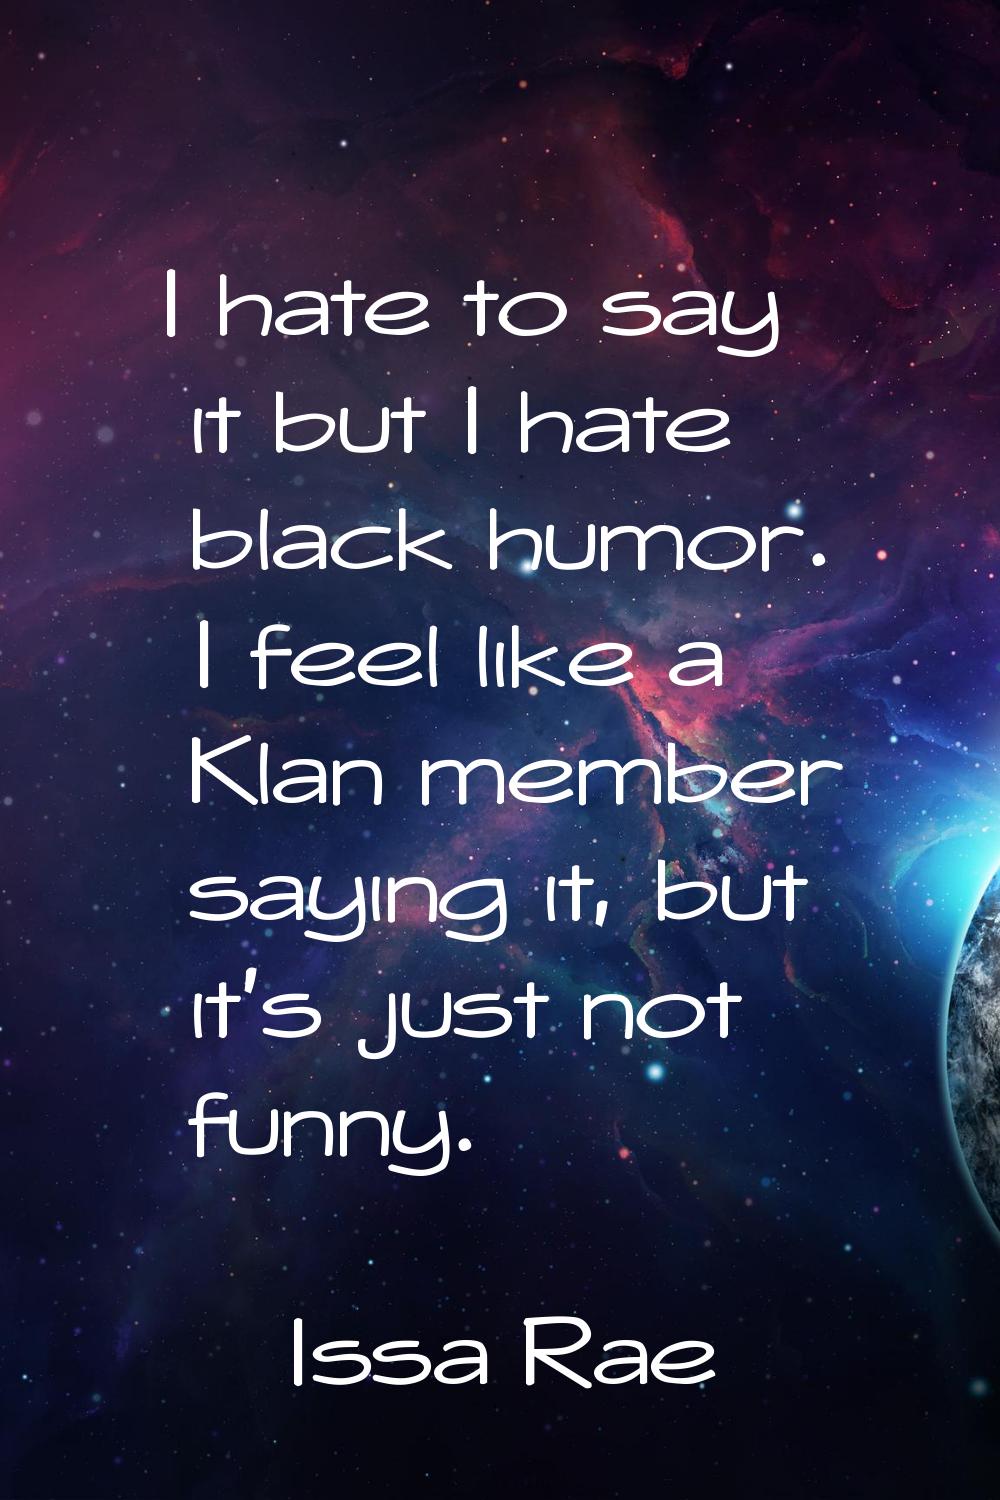 I hate to say it but I hate black humor. I feel like a Klan member saying it, but it's just not fun